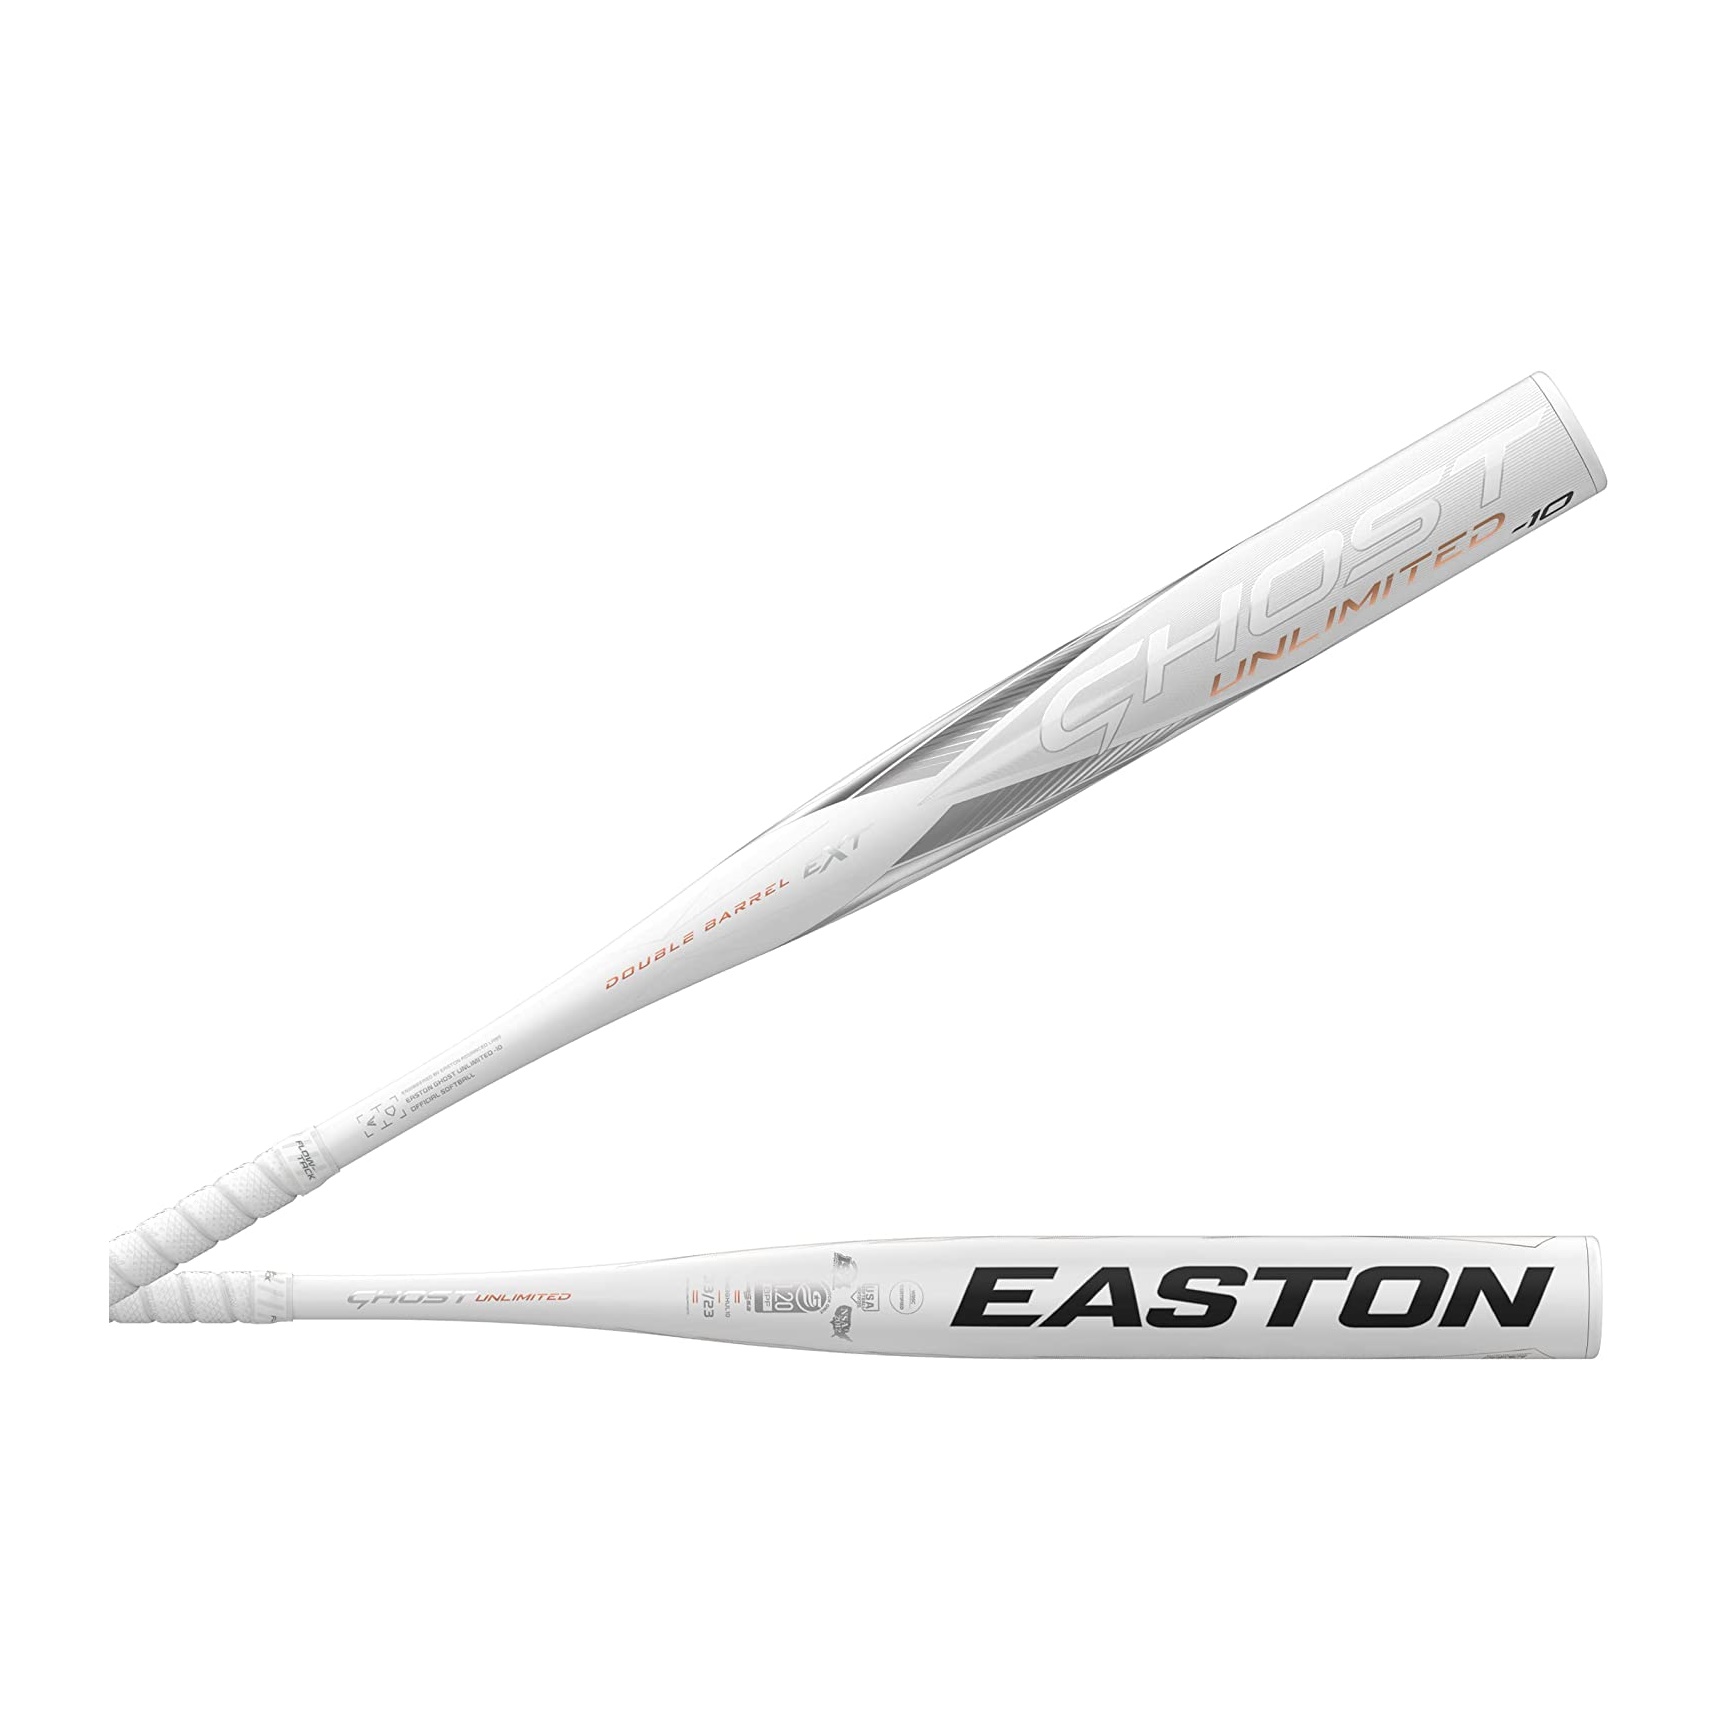 Introducing the Easton Ghost Unlimited Fastpitch Softball Bat, a true game-changer in the world of fastpitch softball. Designed to provide the highest level of performance, this bat is packed with innovative features that will enhance your hitting prowess. The Ghost Unlimited features a Double Barrel EXT design that extends the barrel by 1 inch. This extended design creates the largest hitting area allowed, resulting in an even bigger sweet spot. With this bat, you can expect maximum performance and increased chances of making solid contact with the ball. One of the standout features of the Ghost Unlimited is the SONIC COMP MAX composite material used in its construction. This high-performing composite is not only incredibly durable but also delivers outstanding performance. With the lowest barrel compression, this bat ensures maximum power and distance on every hit. The iconic sound produced by the bat reverberates across all fields, making your presence known. To optimize performance even further, the Ghost Unlimited incorporates the VRS1 lightweight internal connection point. This reverse-engineered connection point reduces weight, resulting in an extended barrel and enhanced performance. Additionally, it minimizes vibration on mishits, ensuring a more comfortable and controlled swing. The Power Boost Soft Knob technology is another notable feature of this bat. It provides hitters with increased leverage, allowing for more power and control in their swings. Additionally, it reduces vibration, providing improved comfort for the bottom hand and minimizing the risk of stinging sensations. With the Flow-Tack grip, Easton has created the ultimate combination of cushioning and tackiness. This premium grip ensures a secure and comfortable hold on the bat, giving you full control and confidence at the plate. The Easton Ghost Unlimited Fastpitch Softball Bat is certified for use in various leagues, including USA, USSSA (fastpitch only), NSA, ISA, and WBSC. Whether you're playing in local leagues or on the international stage, this bat is ready to perform at the highest level. The Easton Ghost Unlimited Fastpitch Softball Bat is a game-changing piece of equipment that provides unmatched performance and durability. With its extended barrel design, high-performing composite material, lightweight connection point, power boost technology, and premium grip, this bat is designed to elevate your game. Step up to the plate with confidence and unleash your full potential with the Easton Ghost Unlimited.